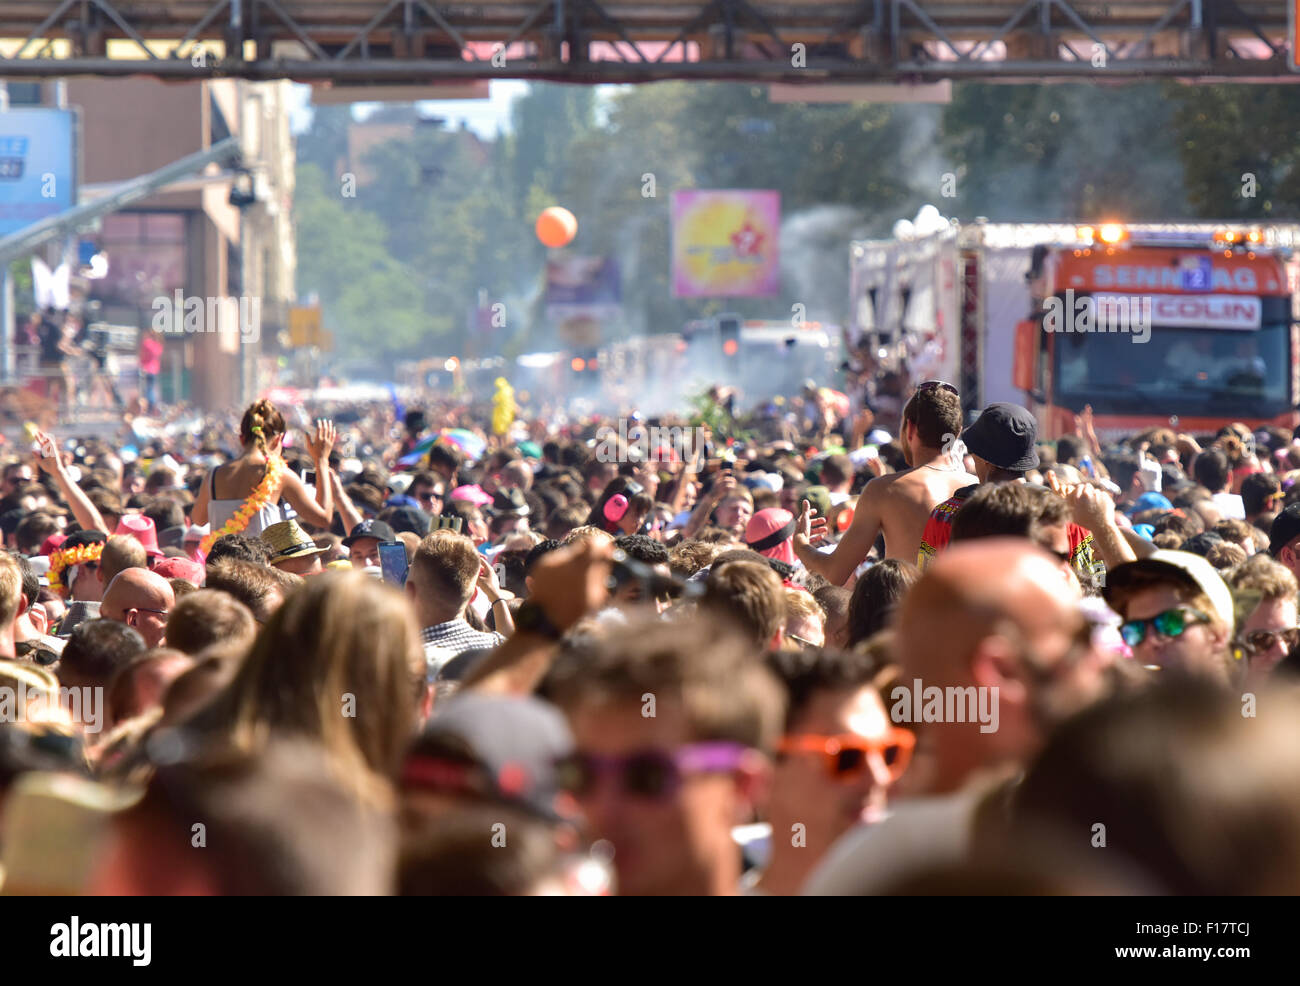 Zurich, Switzerland. 29th Aug, 2015. A million people dance and party at Zurich Streetparade while the parade of 26 love mobiles slowly passes by. Zurich's Streetparade is one of the world's largest techno music event. Credit:  Erik Tham/Alamy Live News Stock Photo